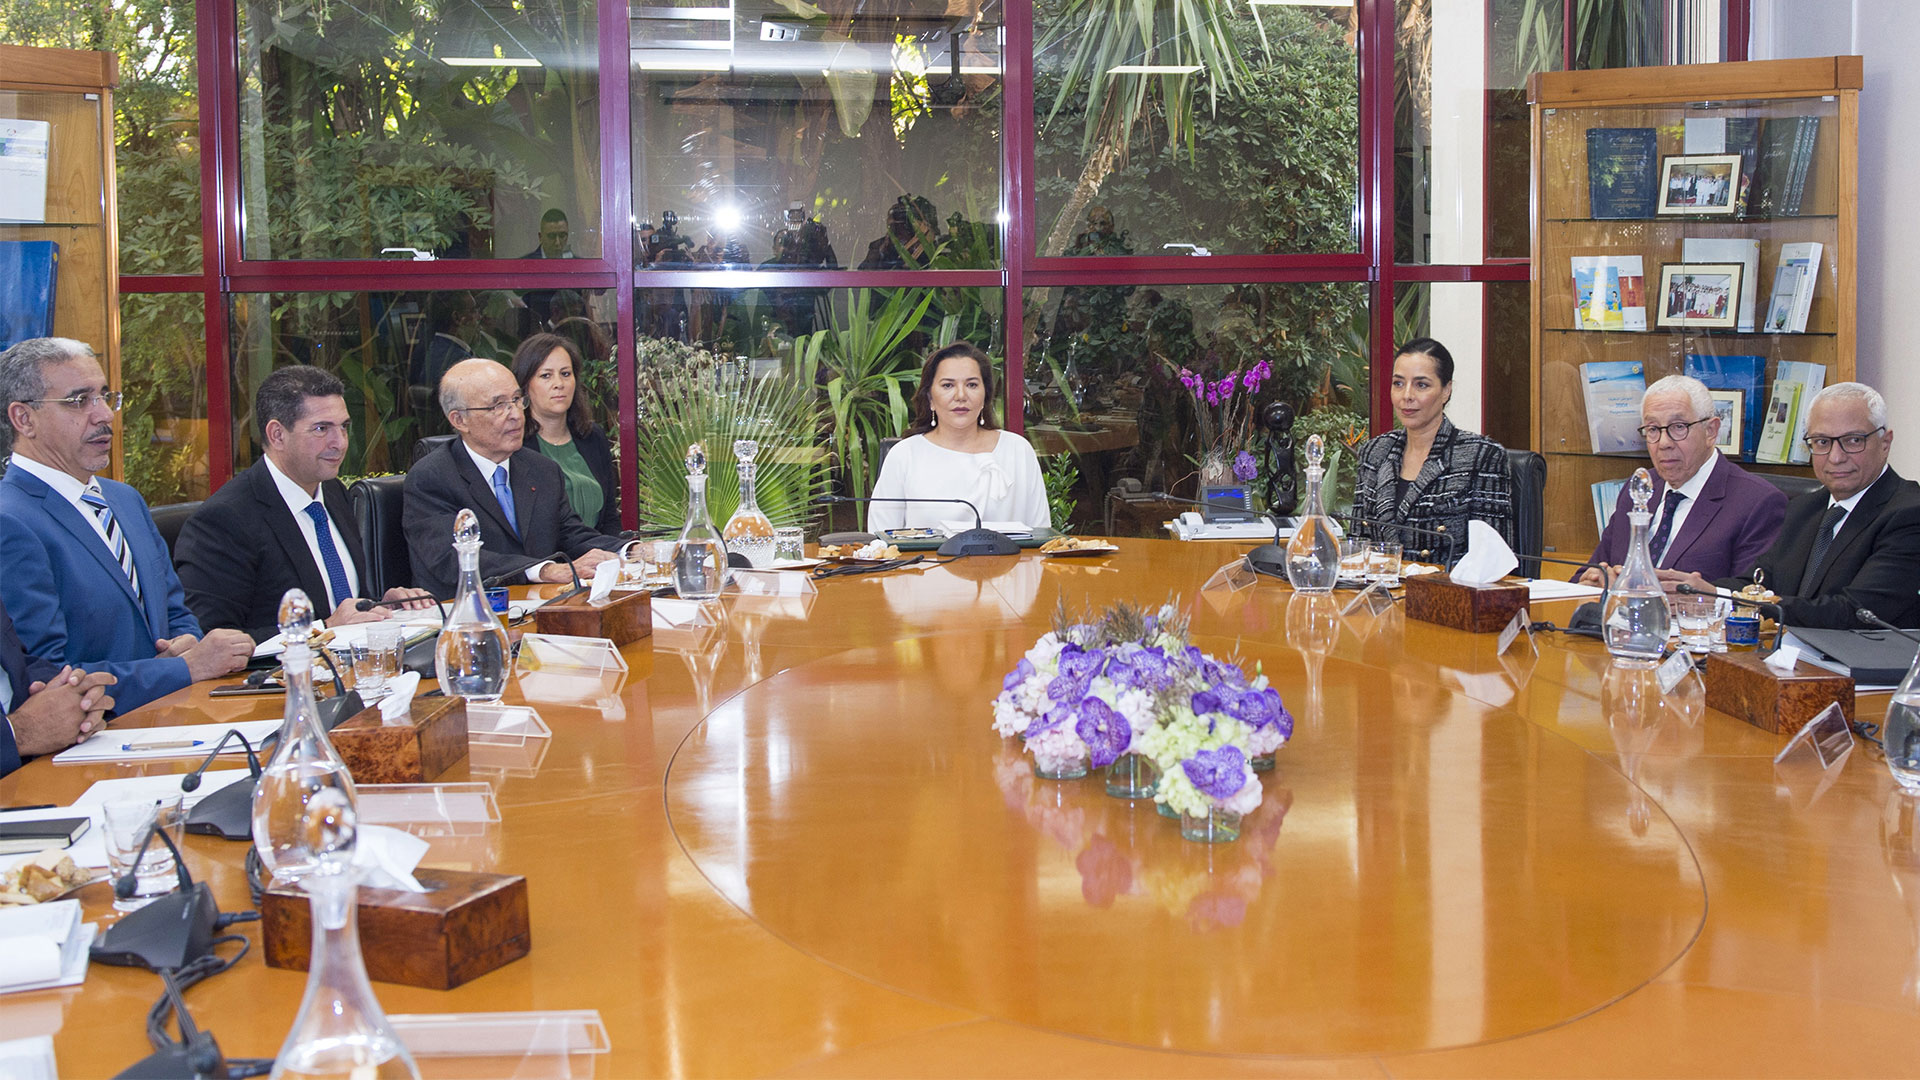 Rabat – The Mohammed VI Foundation for Environmental Protection held its Board of Directors